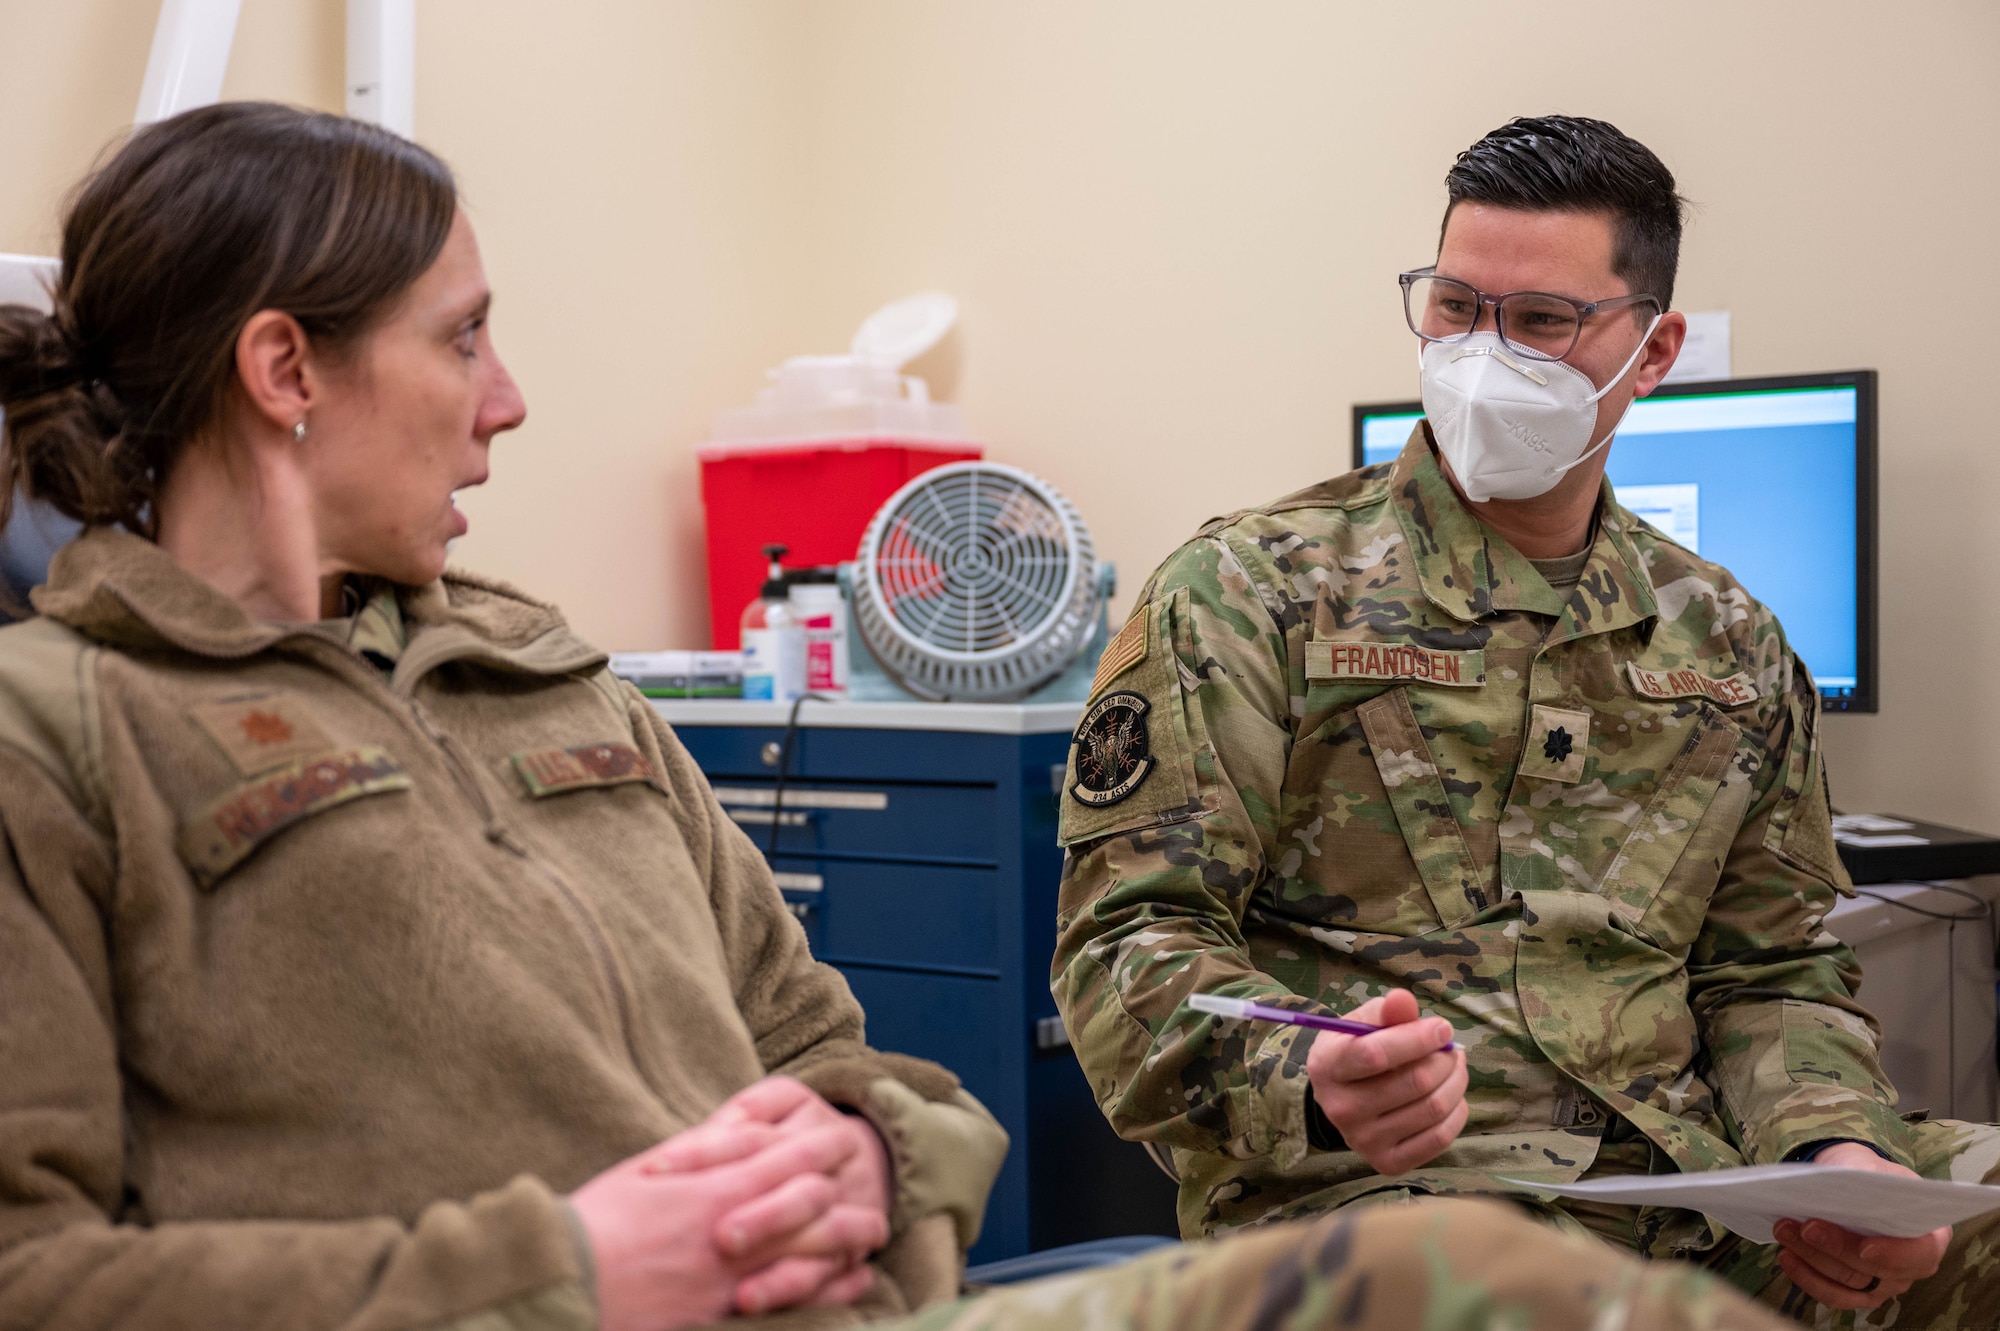 Lt. Col. Peter Frandsen, the 934th Aeromedical Staging Squadron chief of dental services, right, examines a patient, Maj. Katherine Reichert, the 934th ASTS patient safety program manager, at the Minneapolis-Saint Paul Air Reserve Station, February 4, 2023. The dental component is an integral part of the medical readiness process during tri-annual, temporary duty and deployment due exams. (U.S. Air Force photo by Staff Sgt. Timothy Leddick)